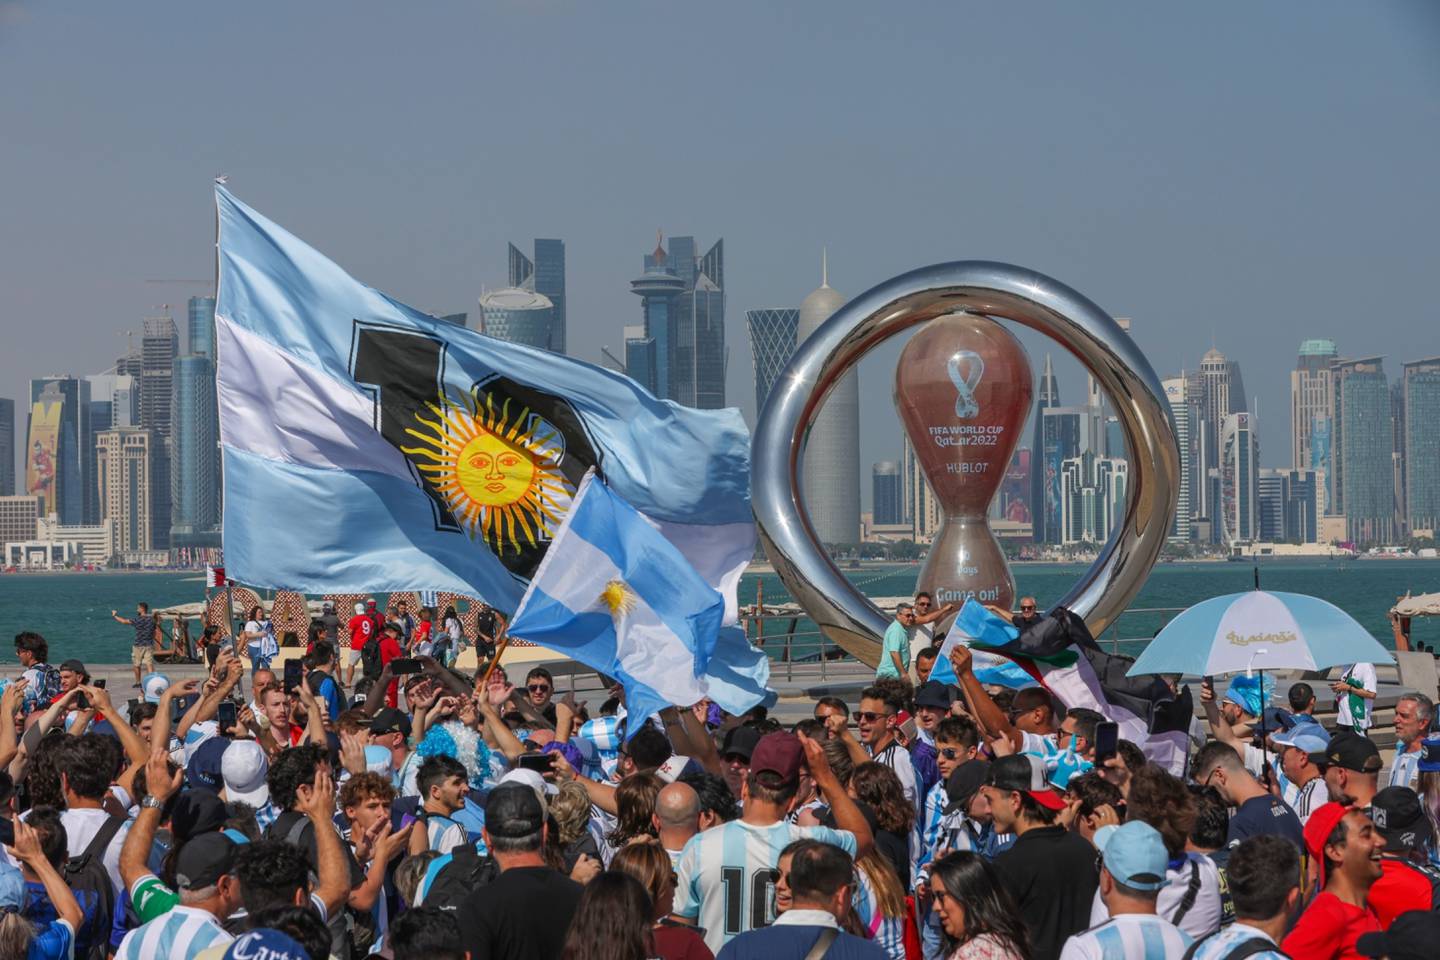 Argentina national soccer team fans congregate on the Doha Corniche in Doha.dfd